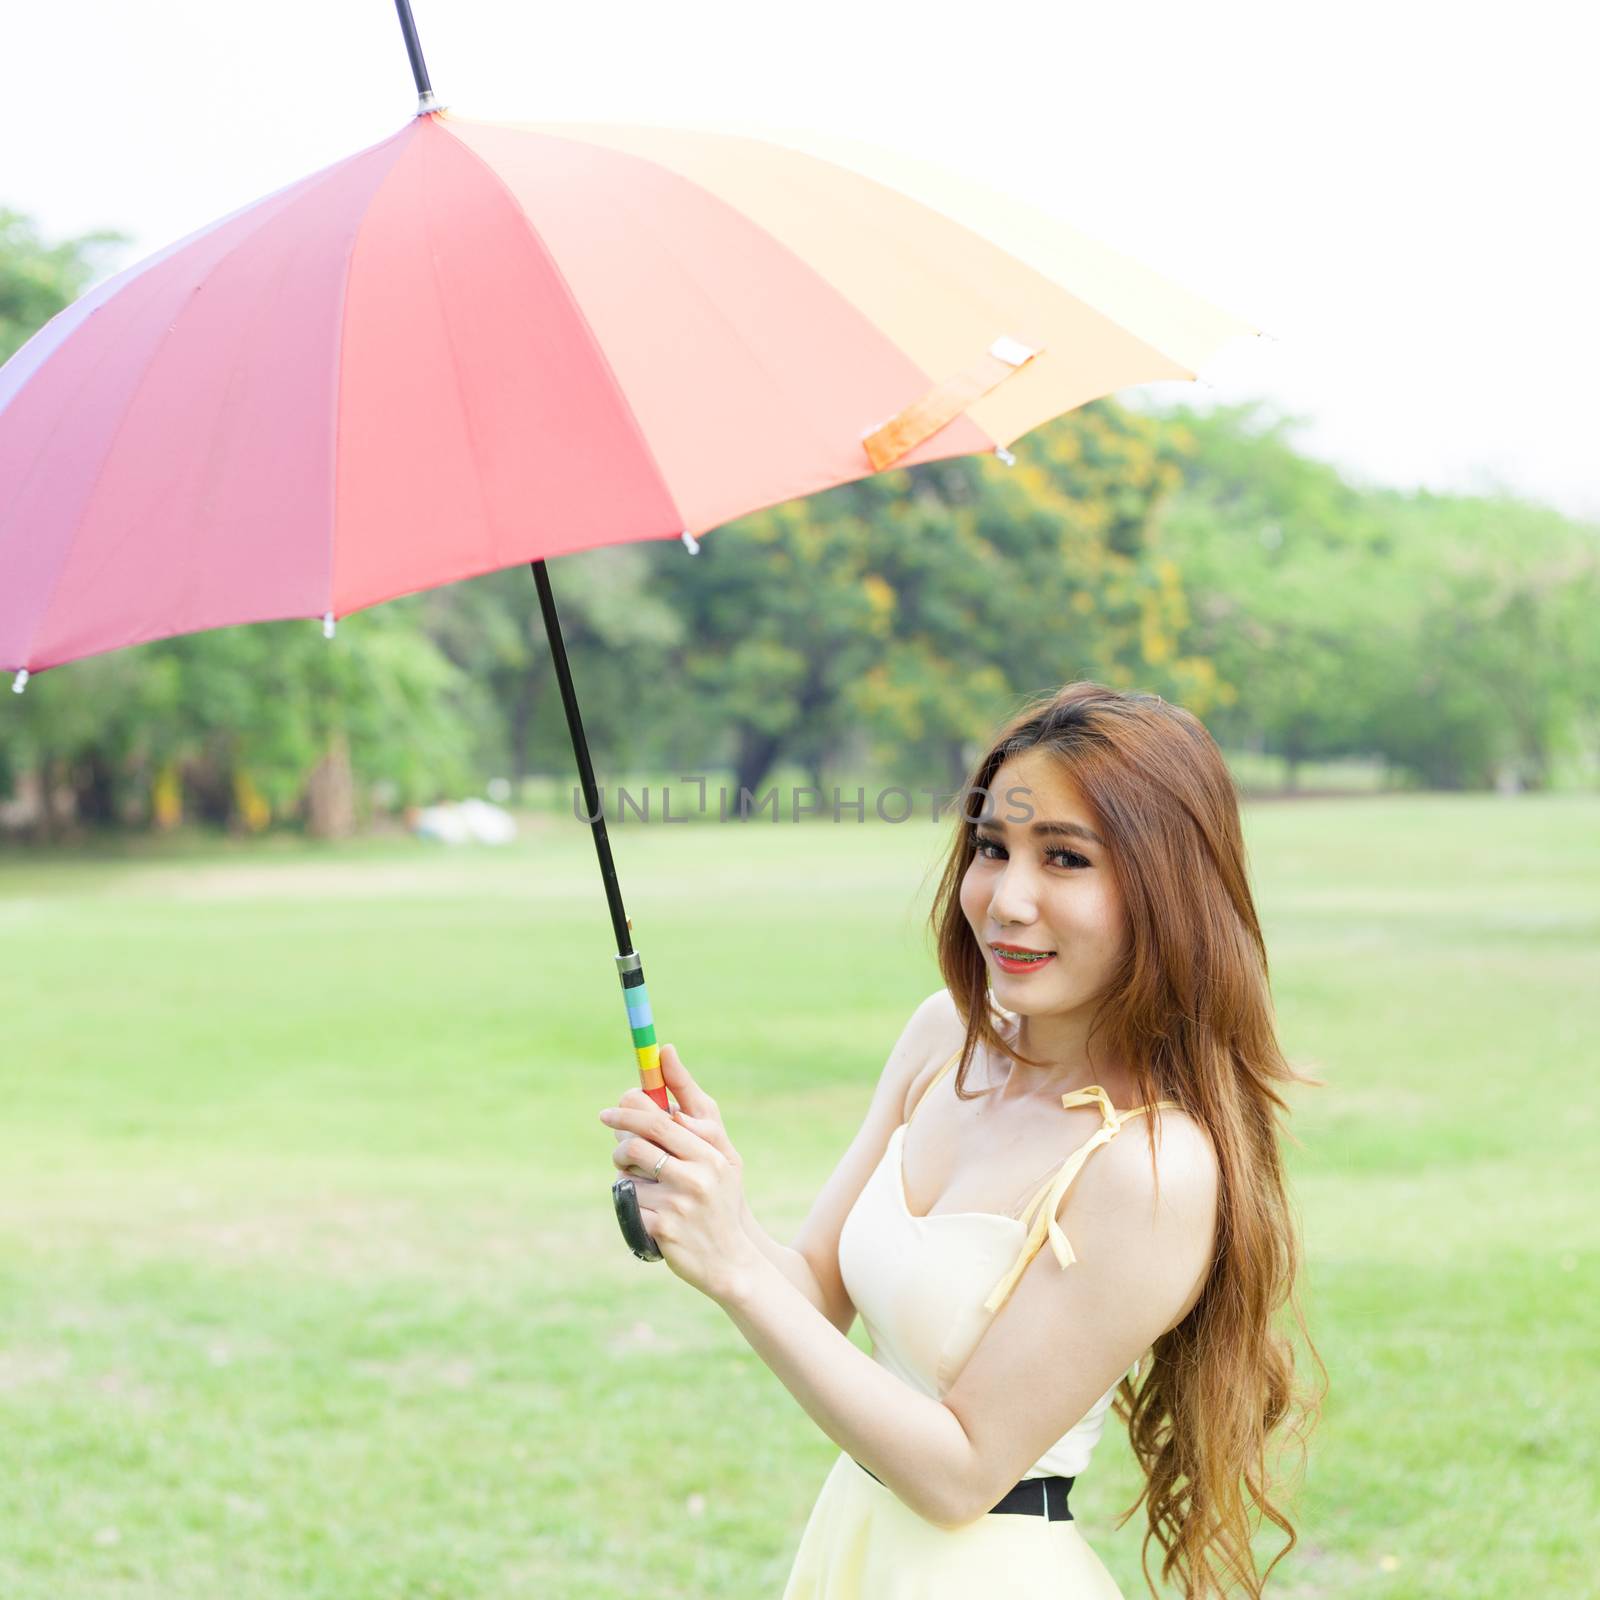 Woman with umbrella standing on the lawn. In the park during the day, the sun is strongest.